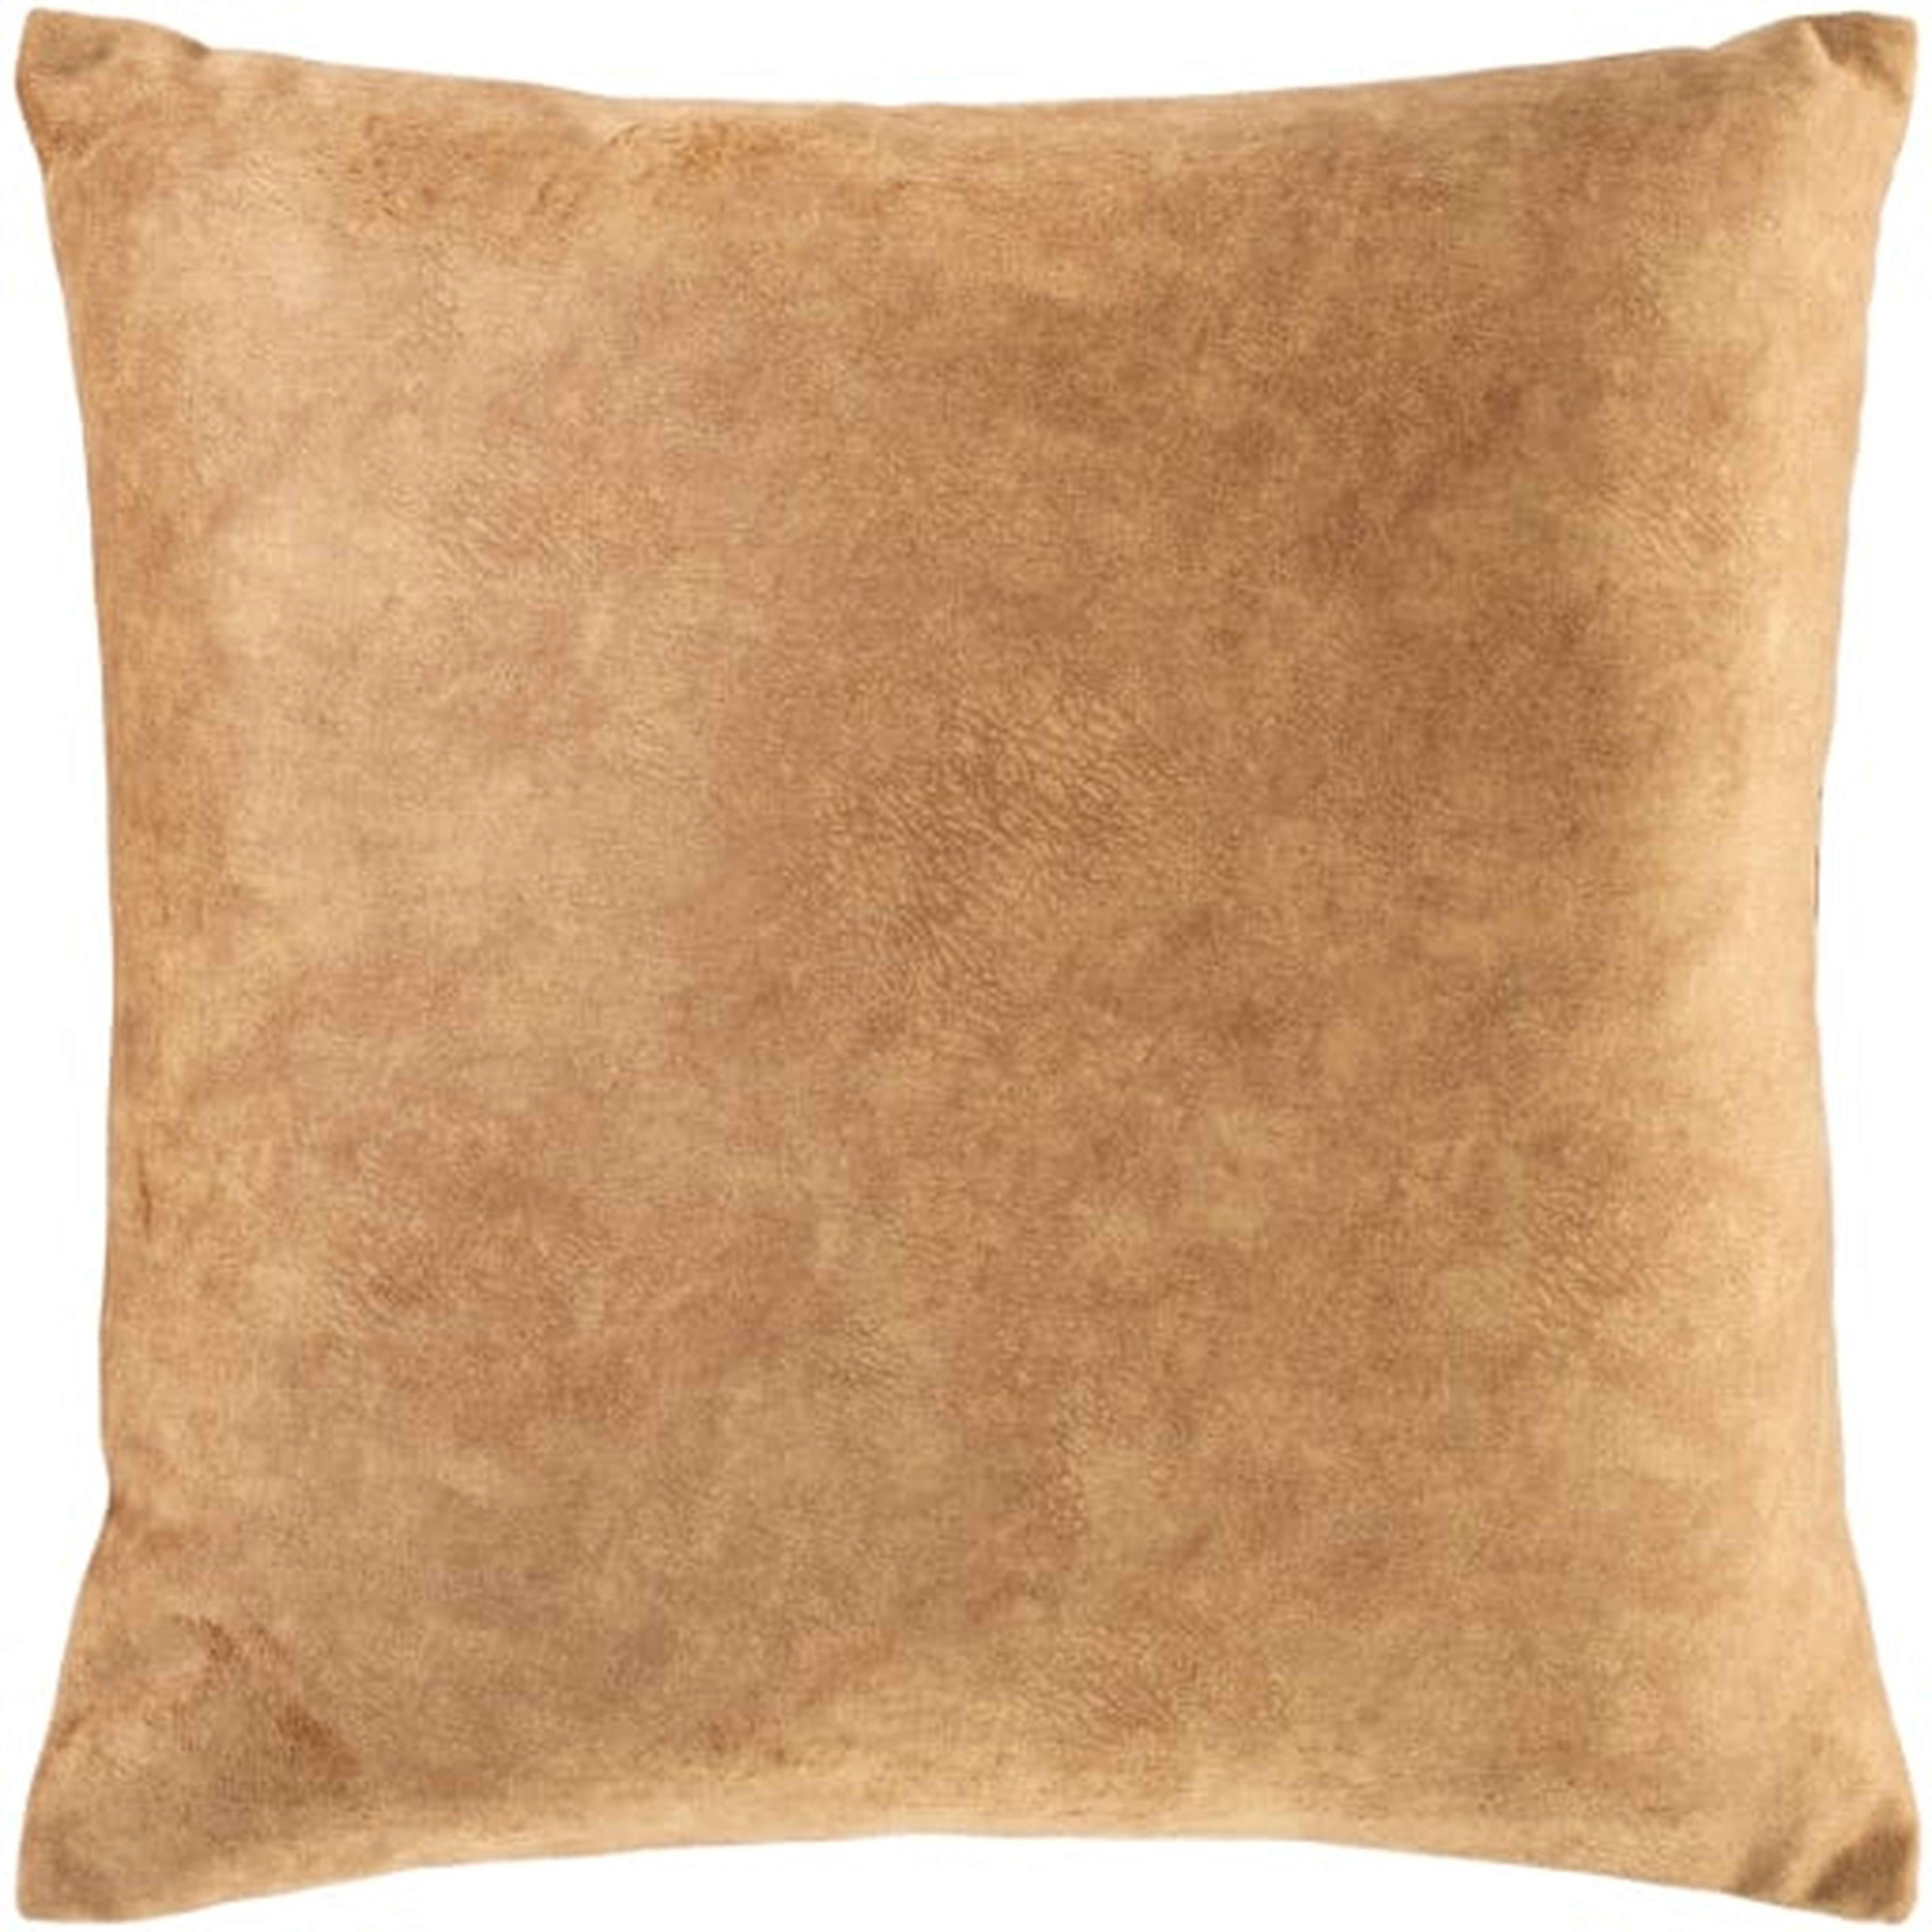 Collins Pillow, 20" x 20", Camel with poly insert - Haldin